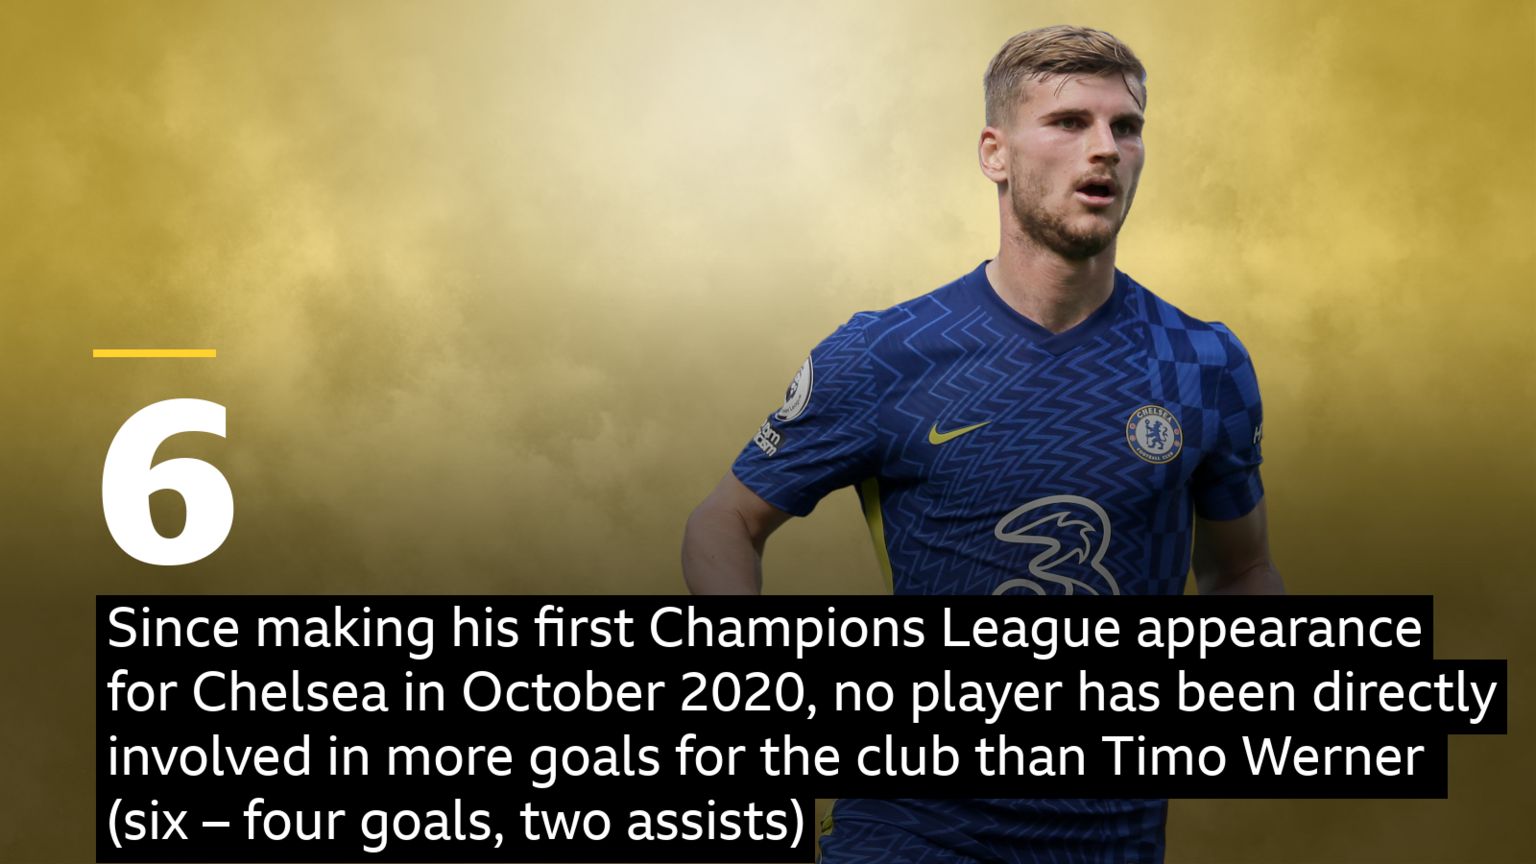 Timo Werner stat: Since making his first Champions League appearance for Chelsea in October 2020, no player has been directly involved in more goals for the club than Timo Werner  (six – four goals, two assists)